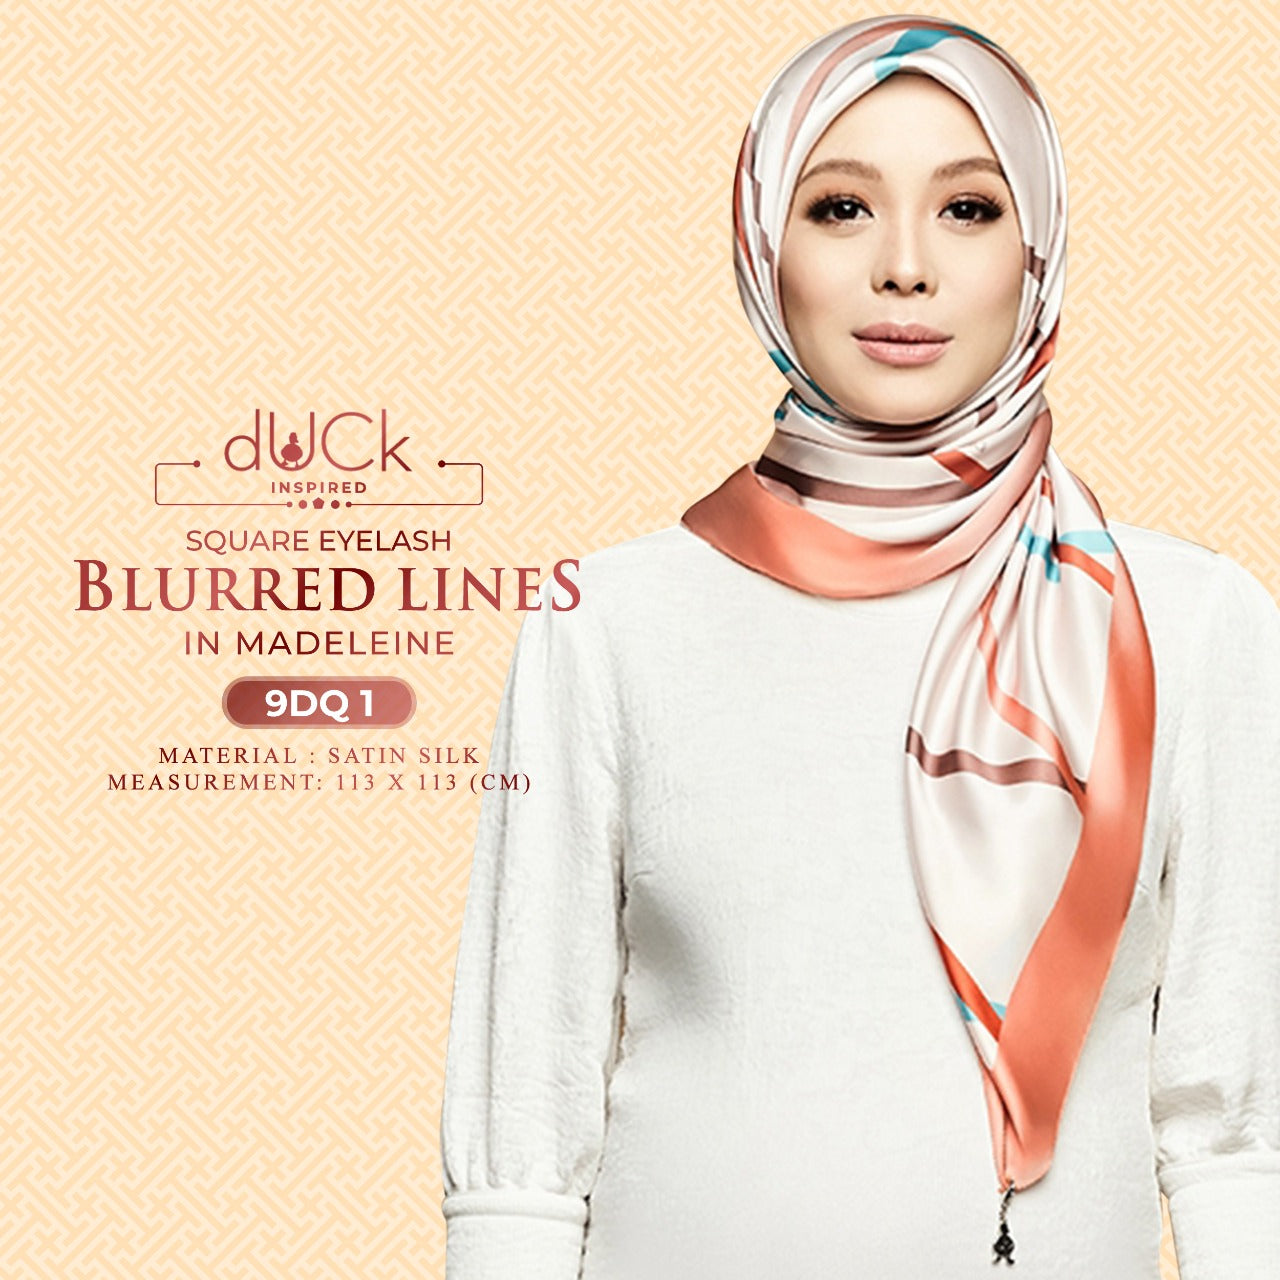 The dUCk Alhambra Eyelash & Blurred LinesSquare Collection RM14